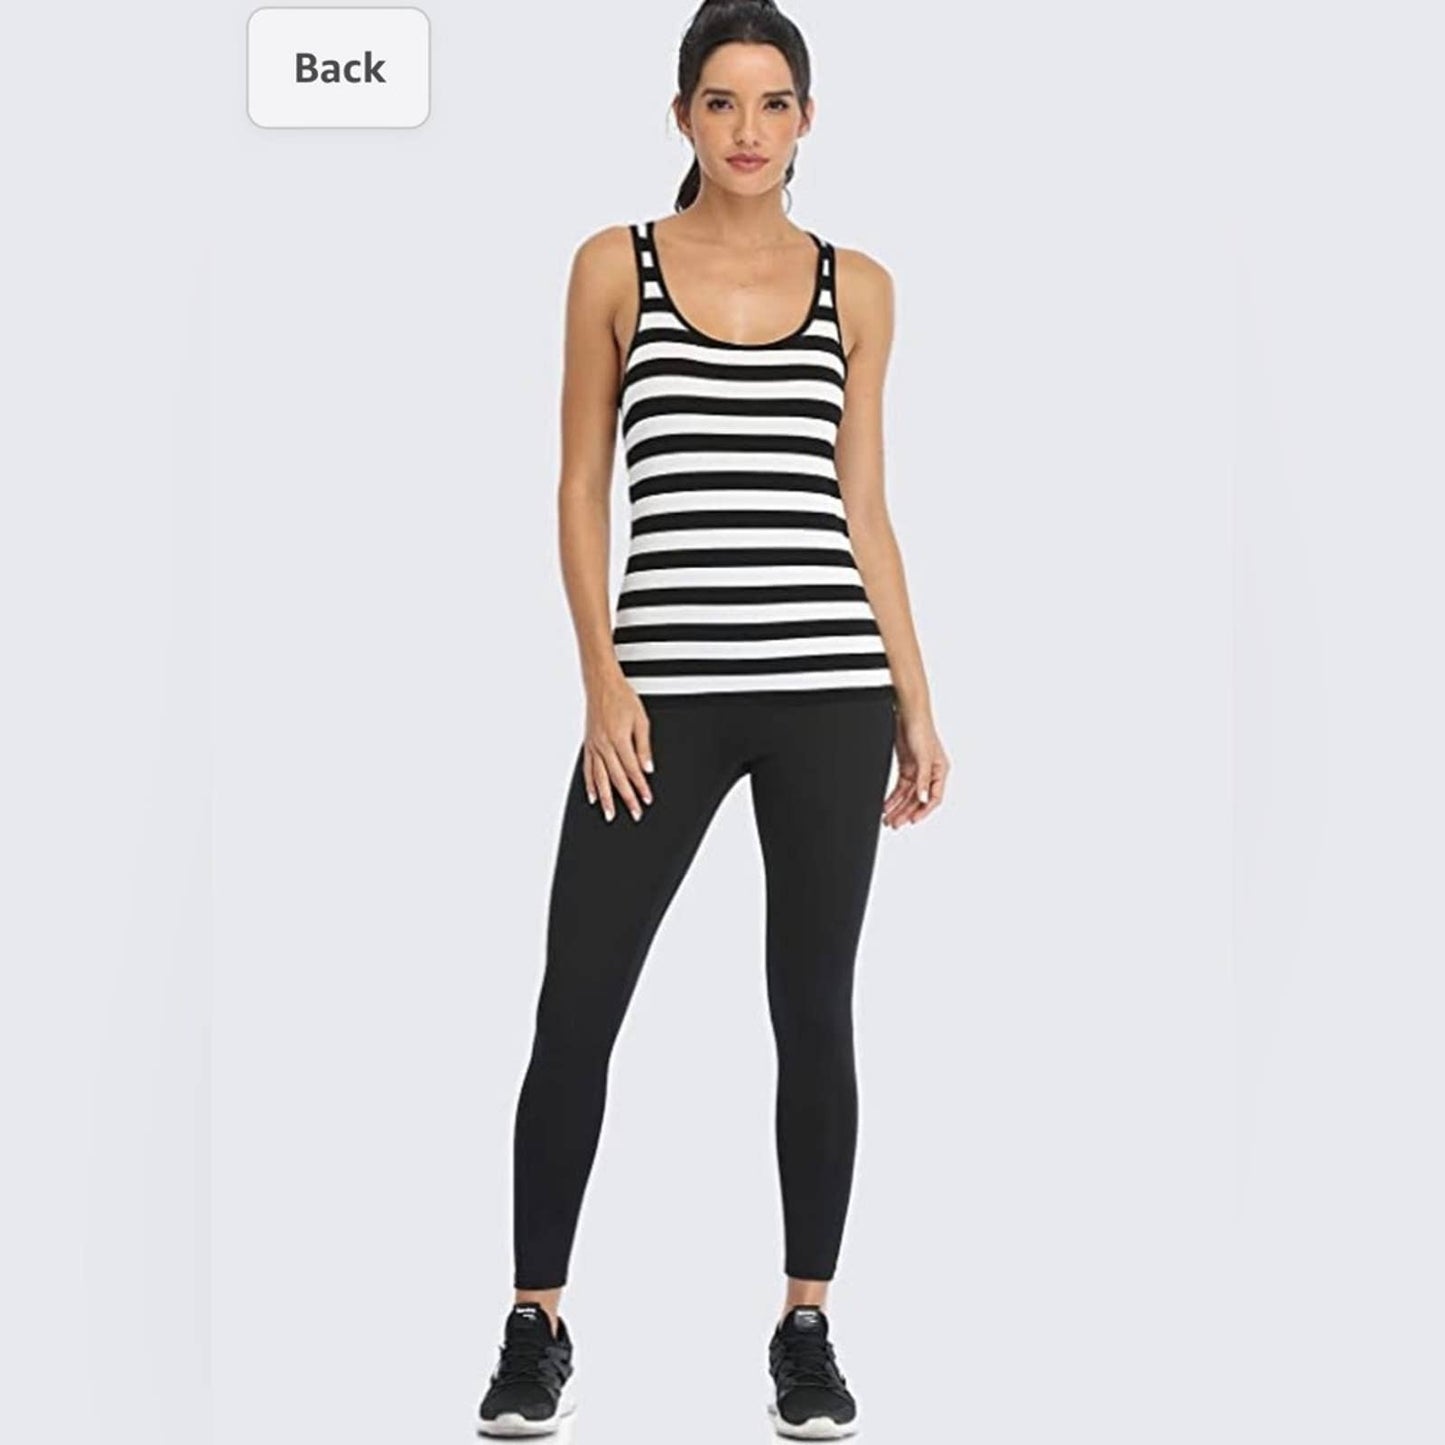 Workout Athletic Tank Tops for Women Pack, Black/White Striped, Small